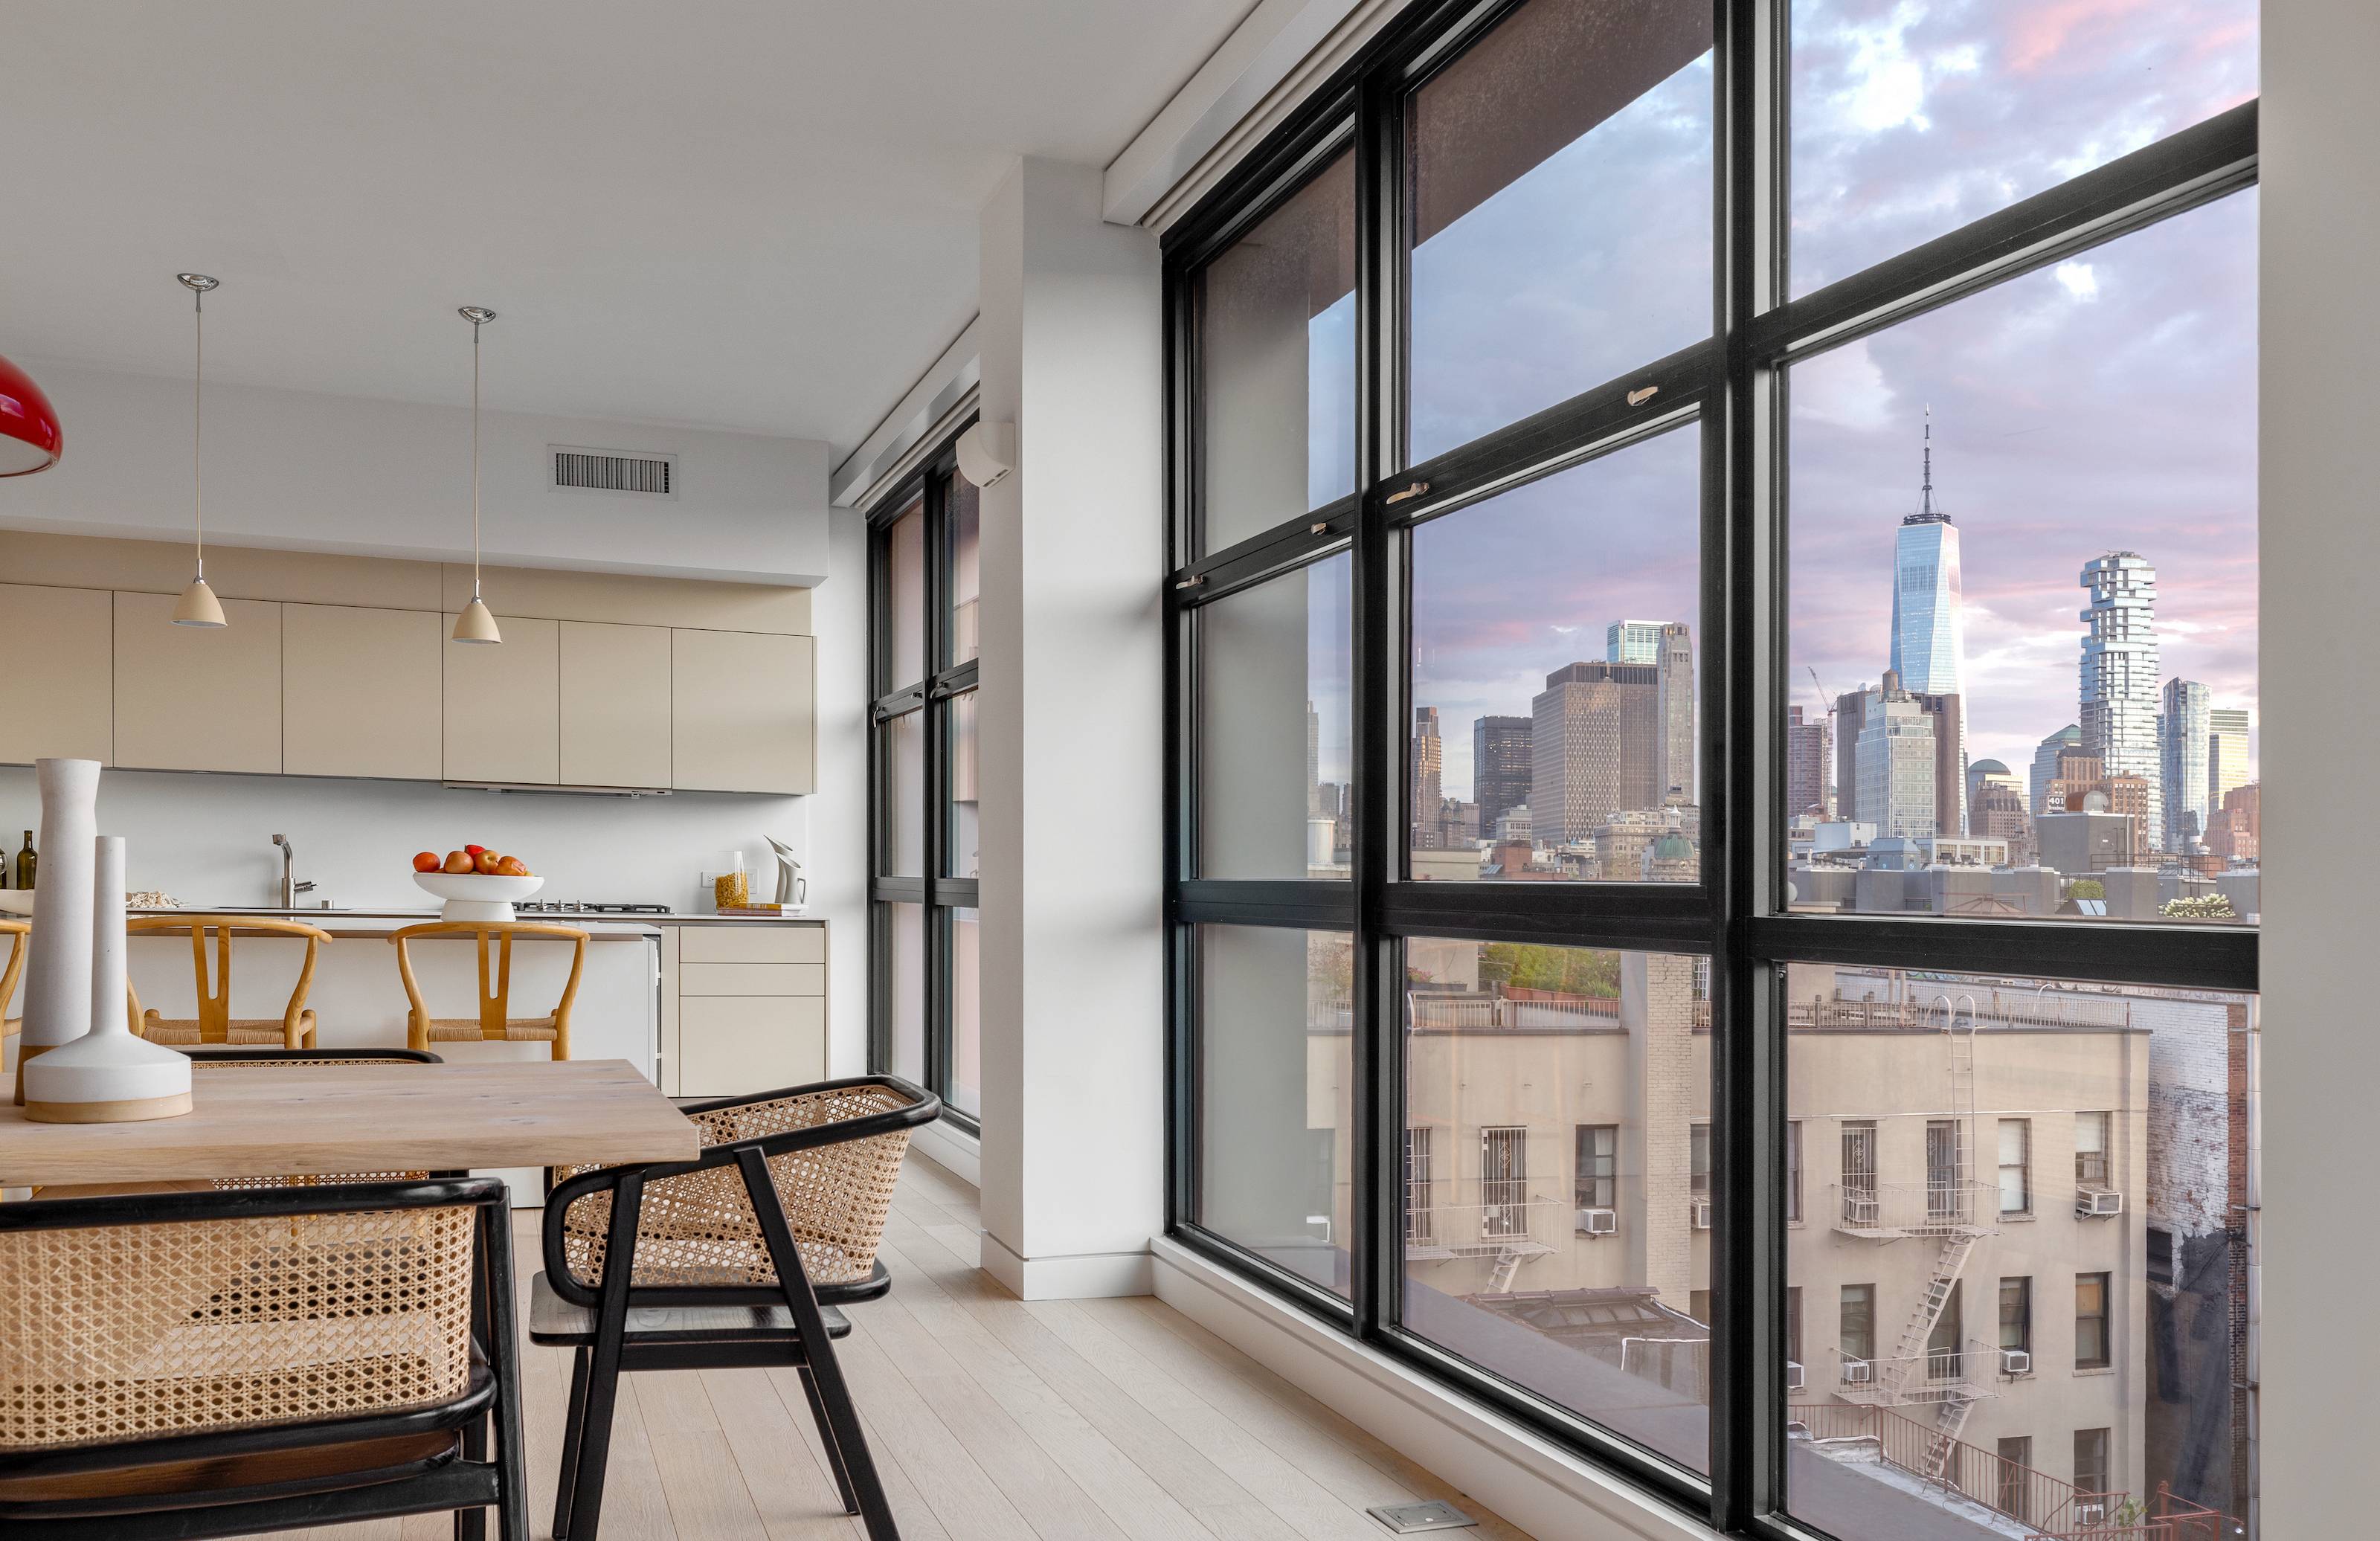 Prime NoLita Penthouse. Available for Resale for the First Time.